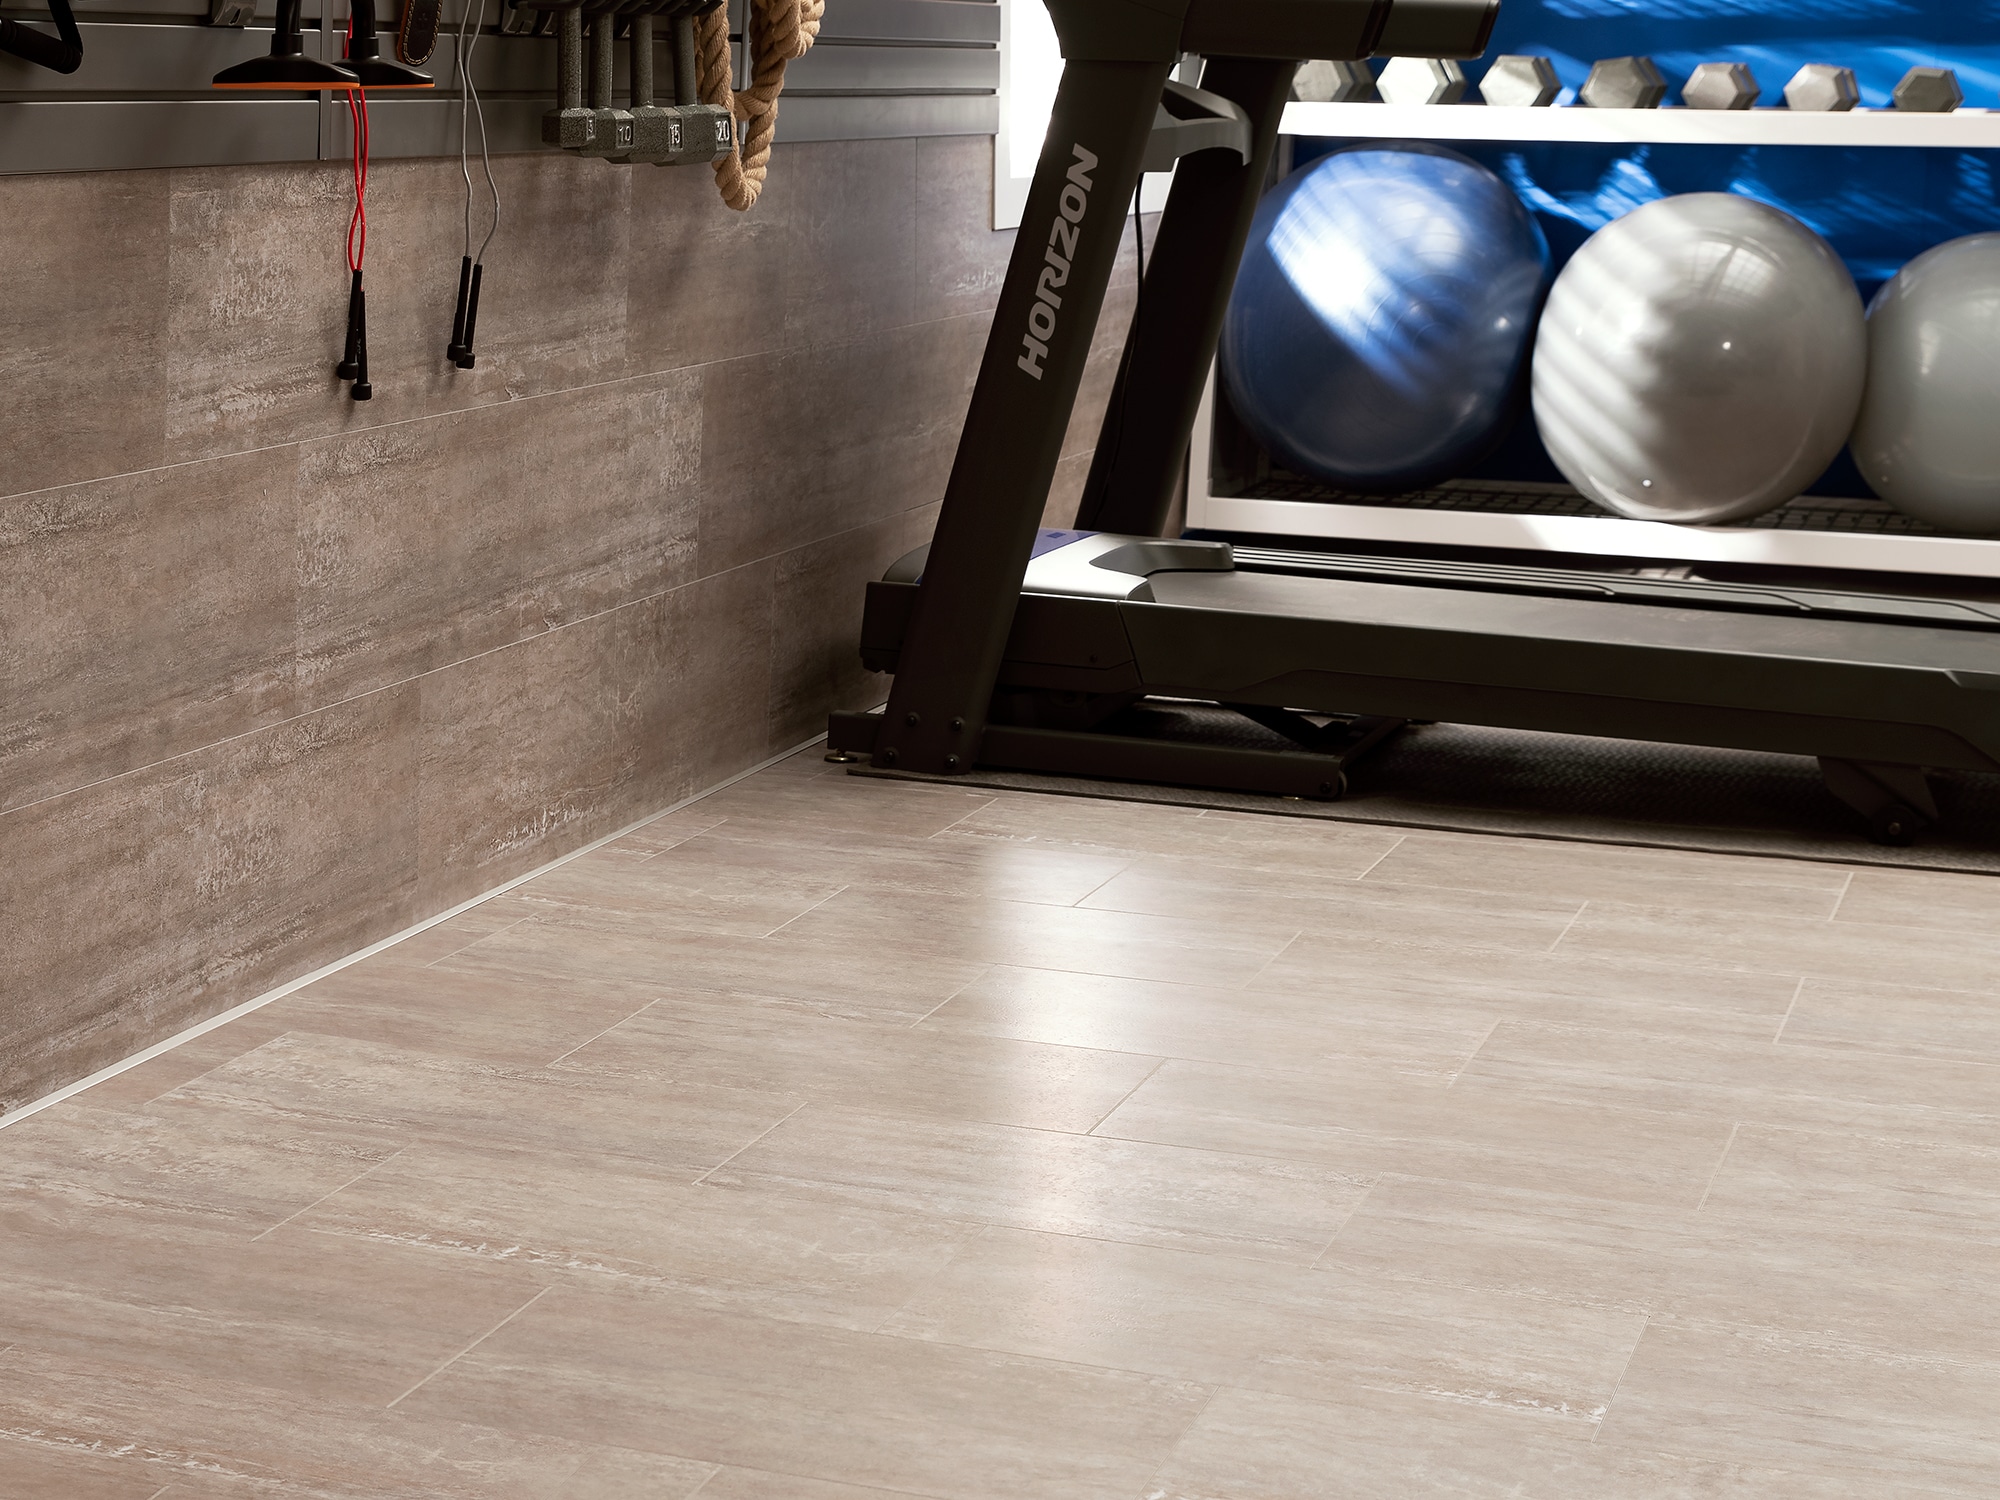 We Review NewAge LVT Garage Tiles, Why they Defy the Rules